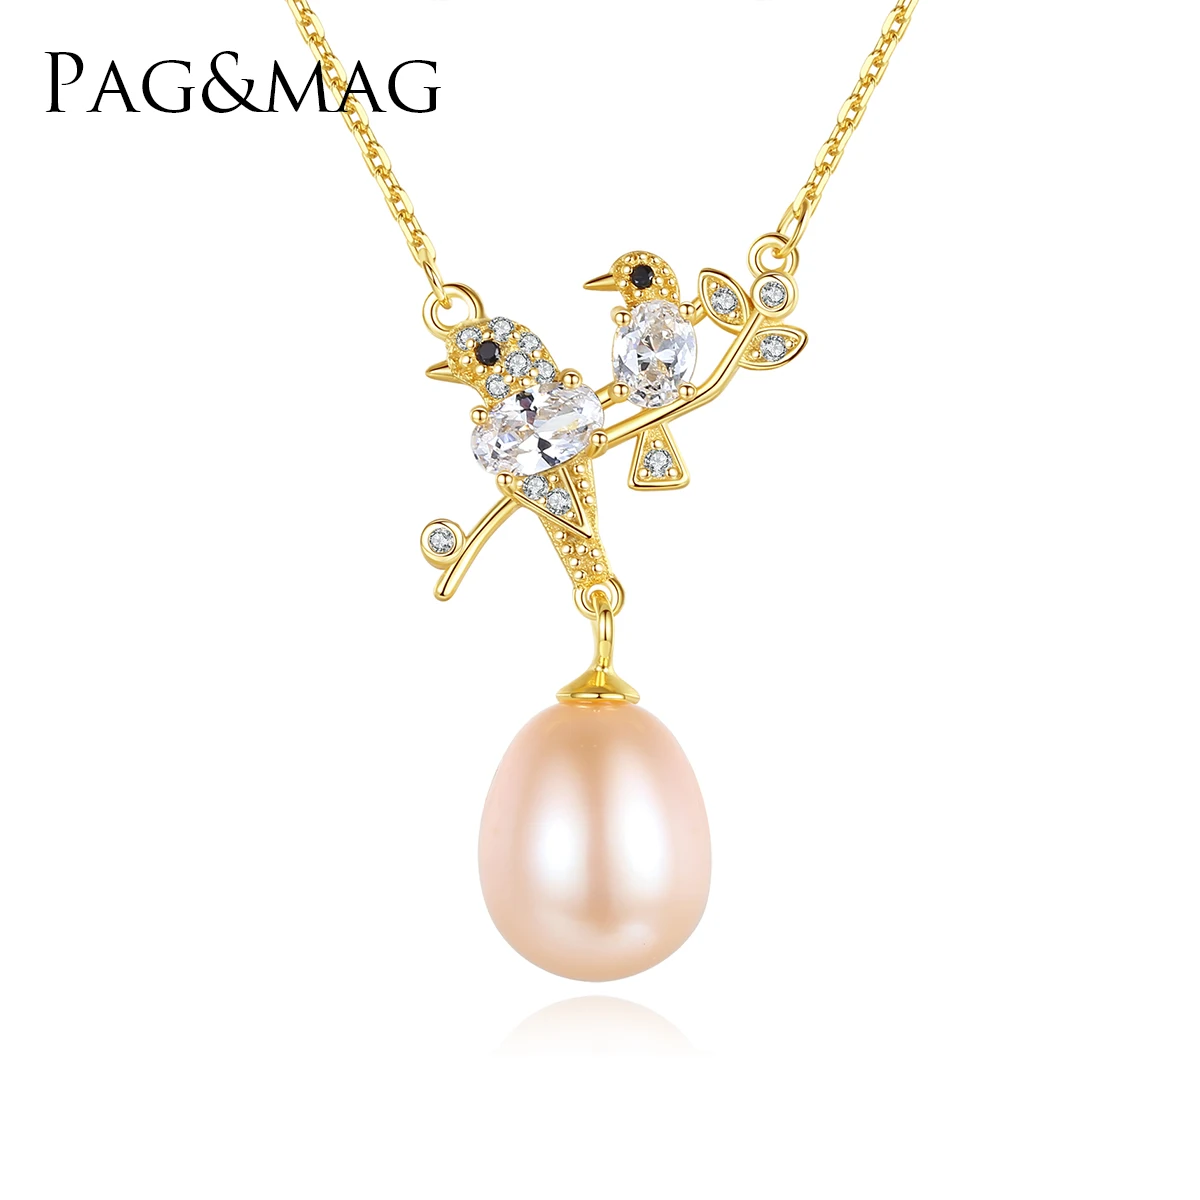 

PAG&MAG Tahitian Pearl Necklaces Pendant Two Cute Birds with Freshwater Pearls S925 Sterling Silver Pendant Necklace